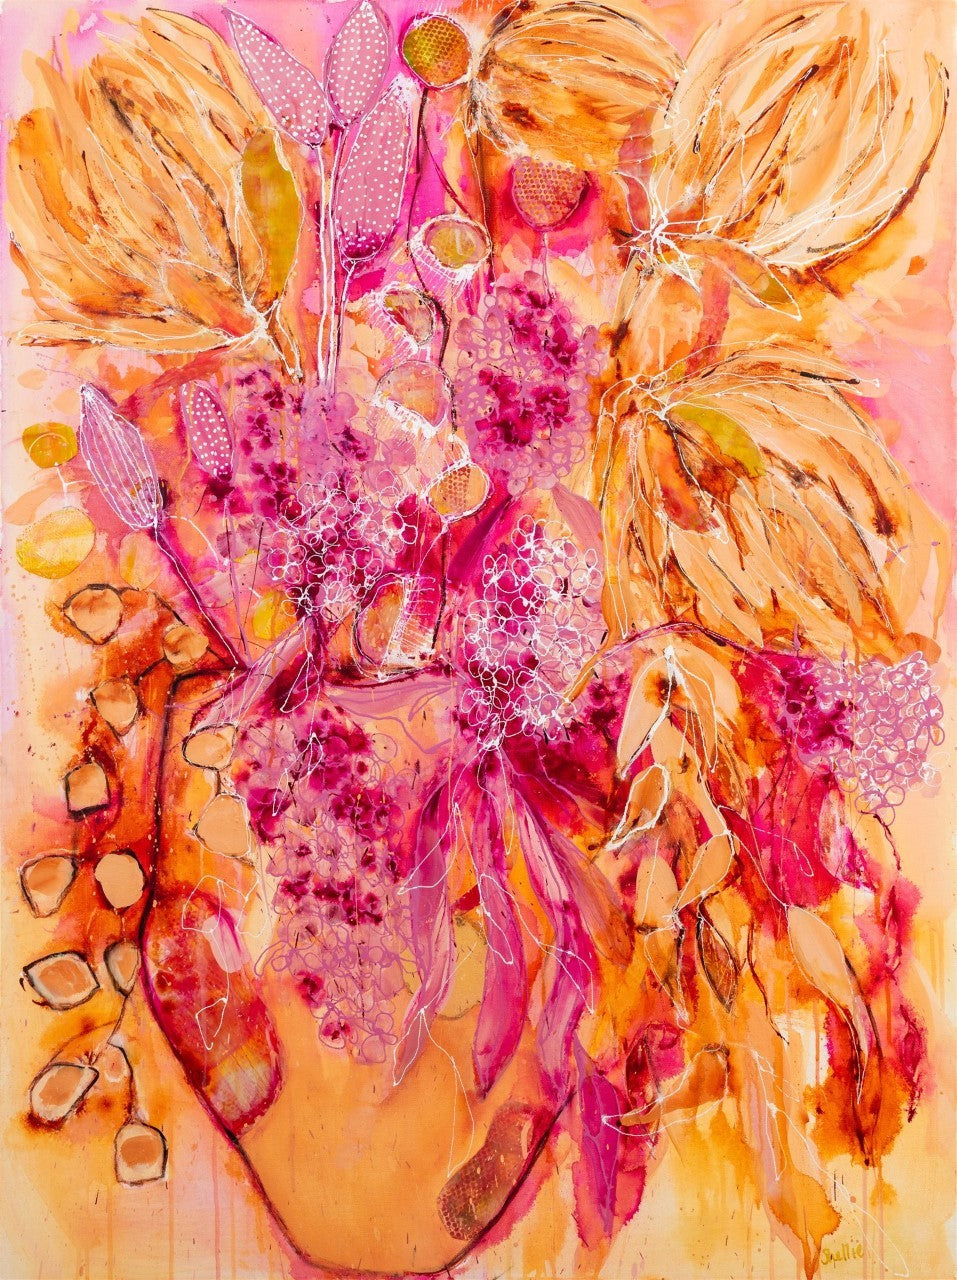 Beautifully coloured expressionist style painting of a vase of blooms in pinks and gold.